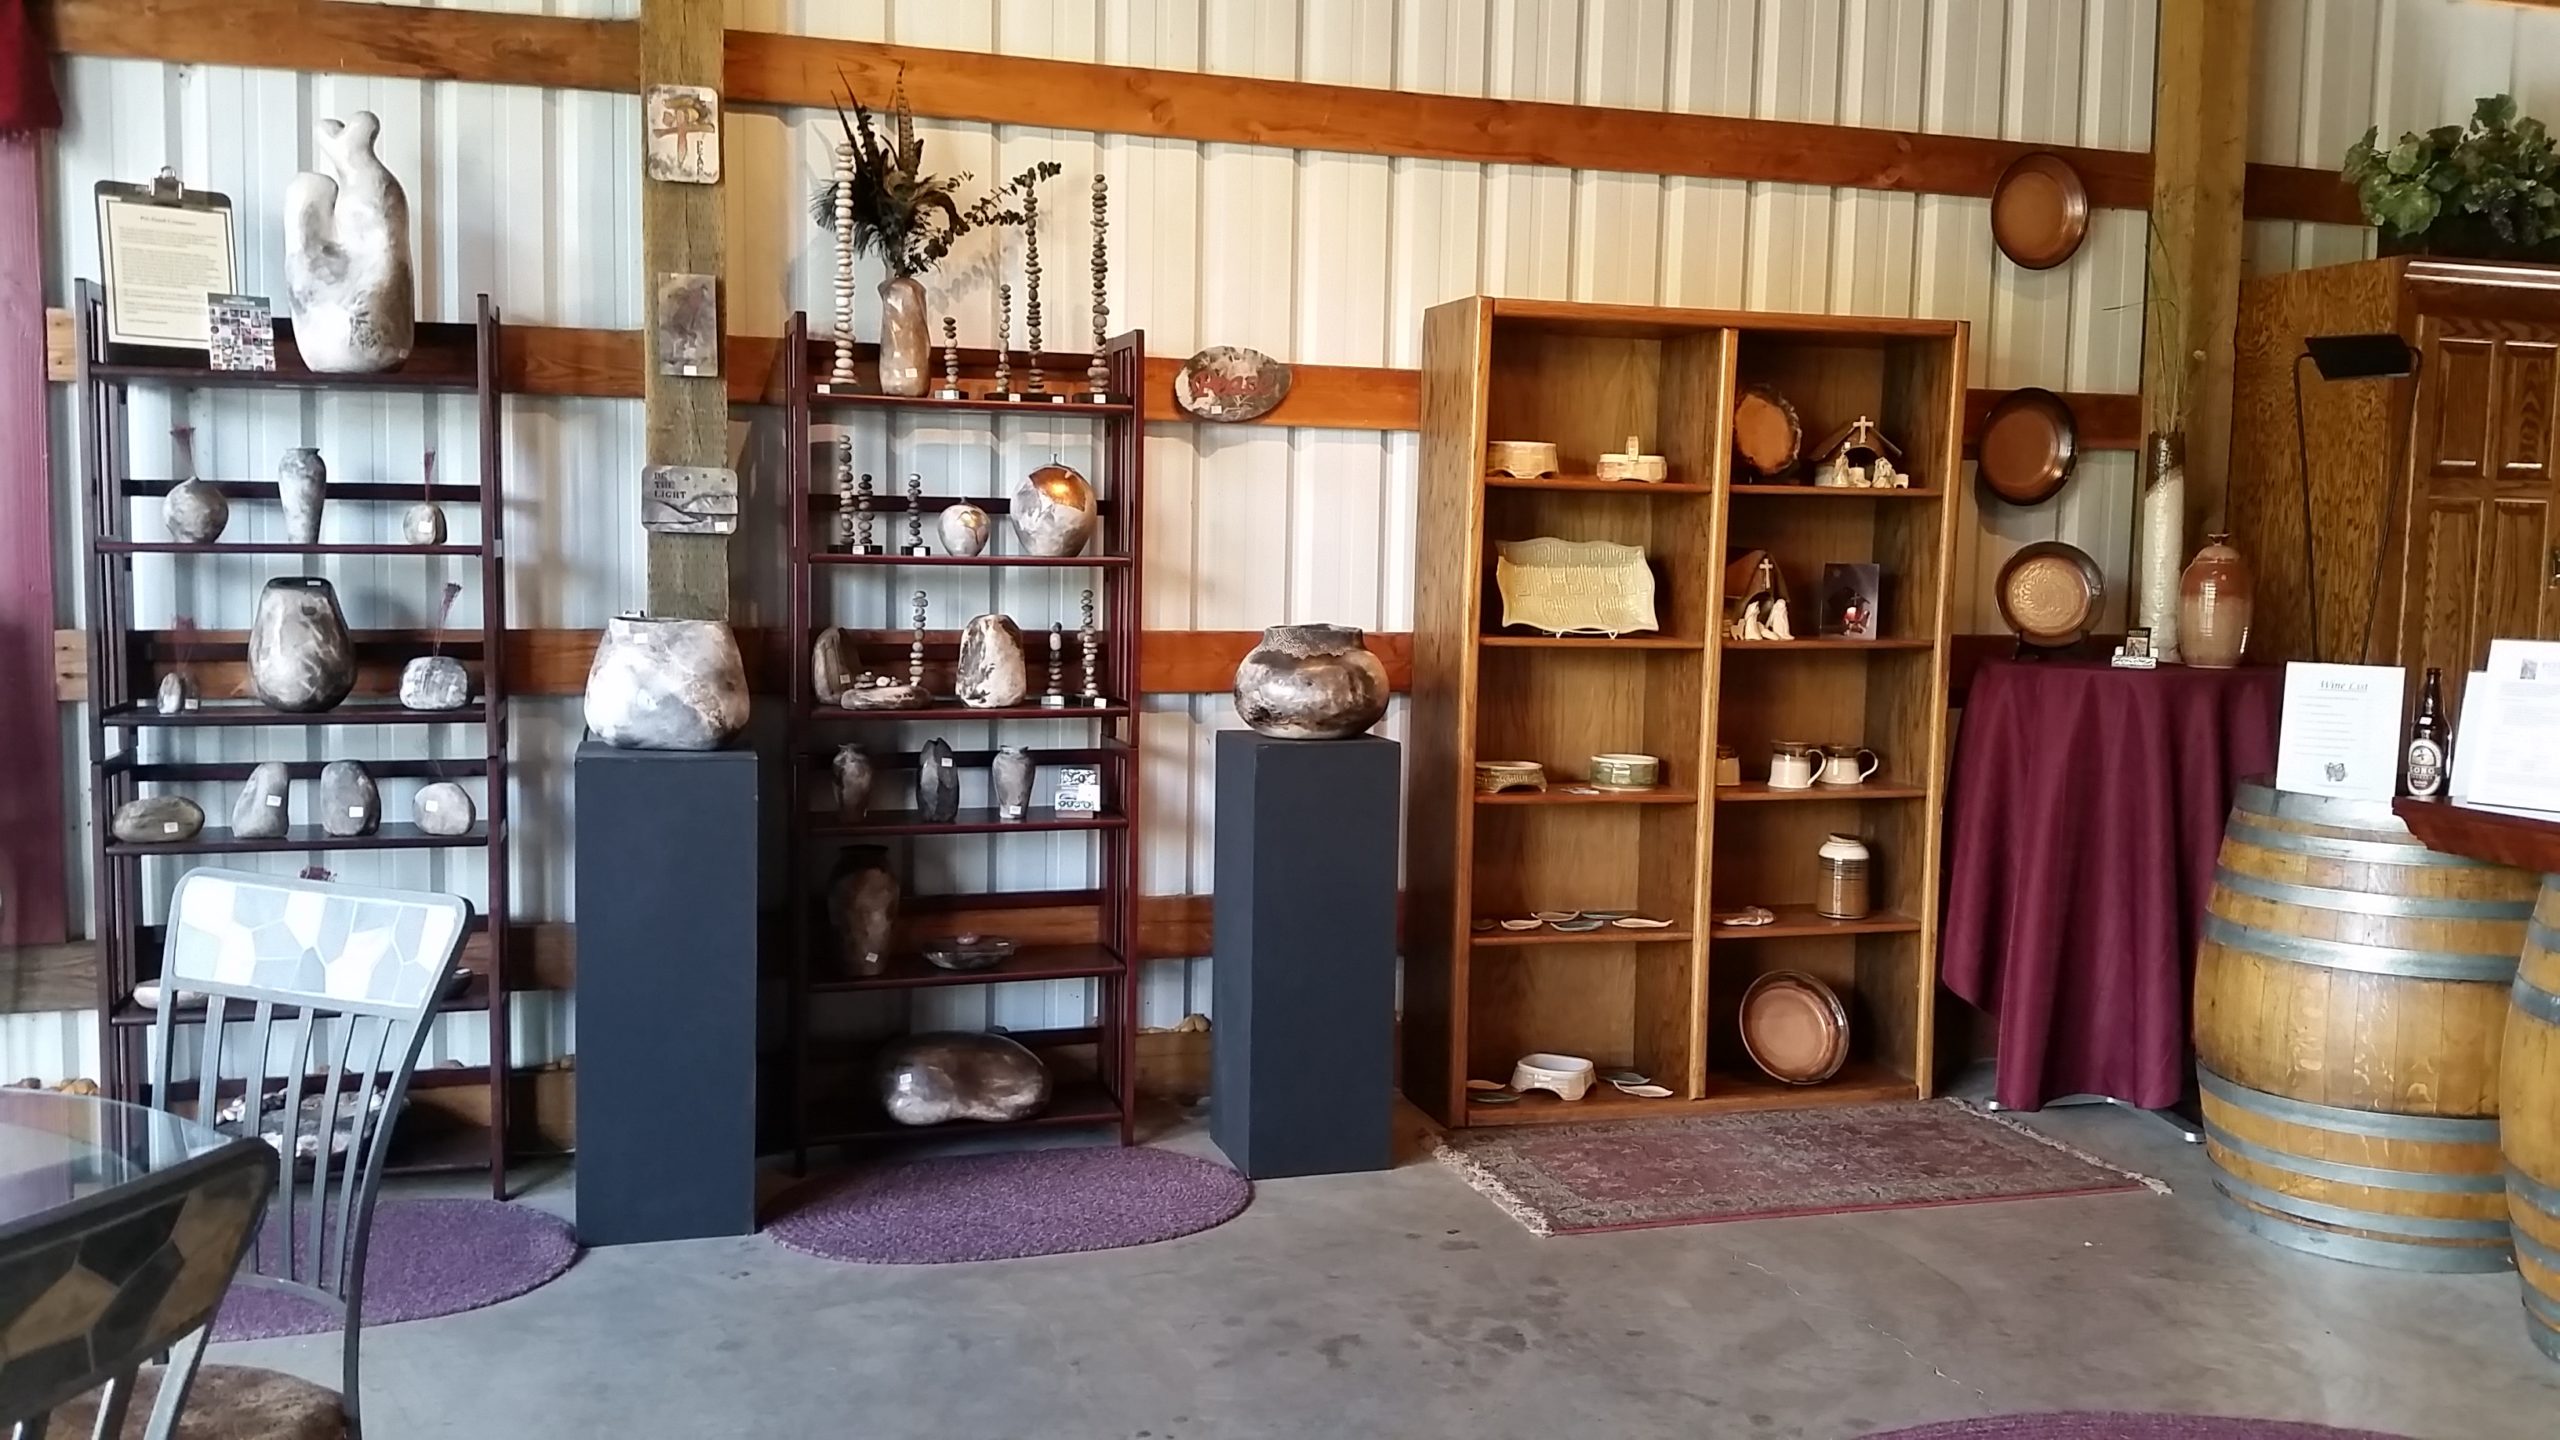 The Potter’s Vineyard & Clay Art Gallery